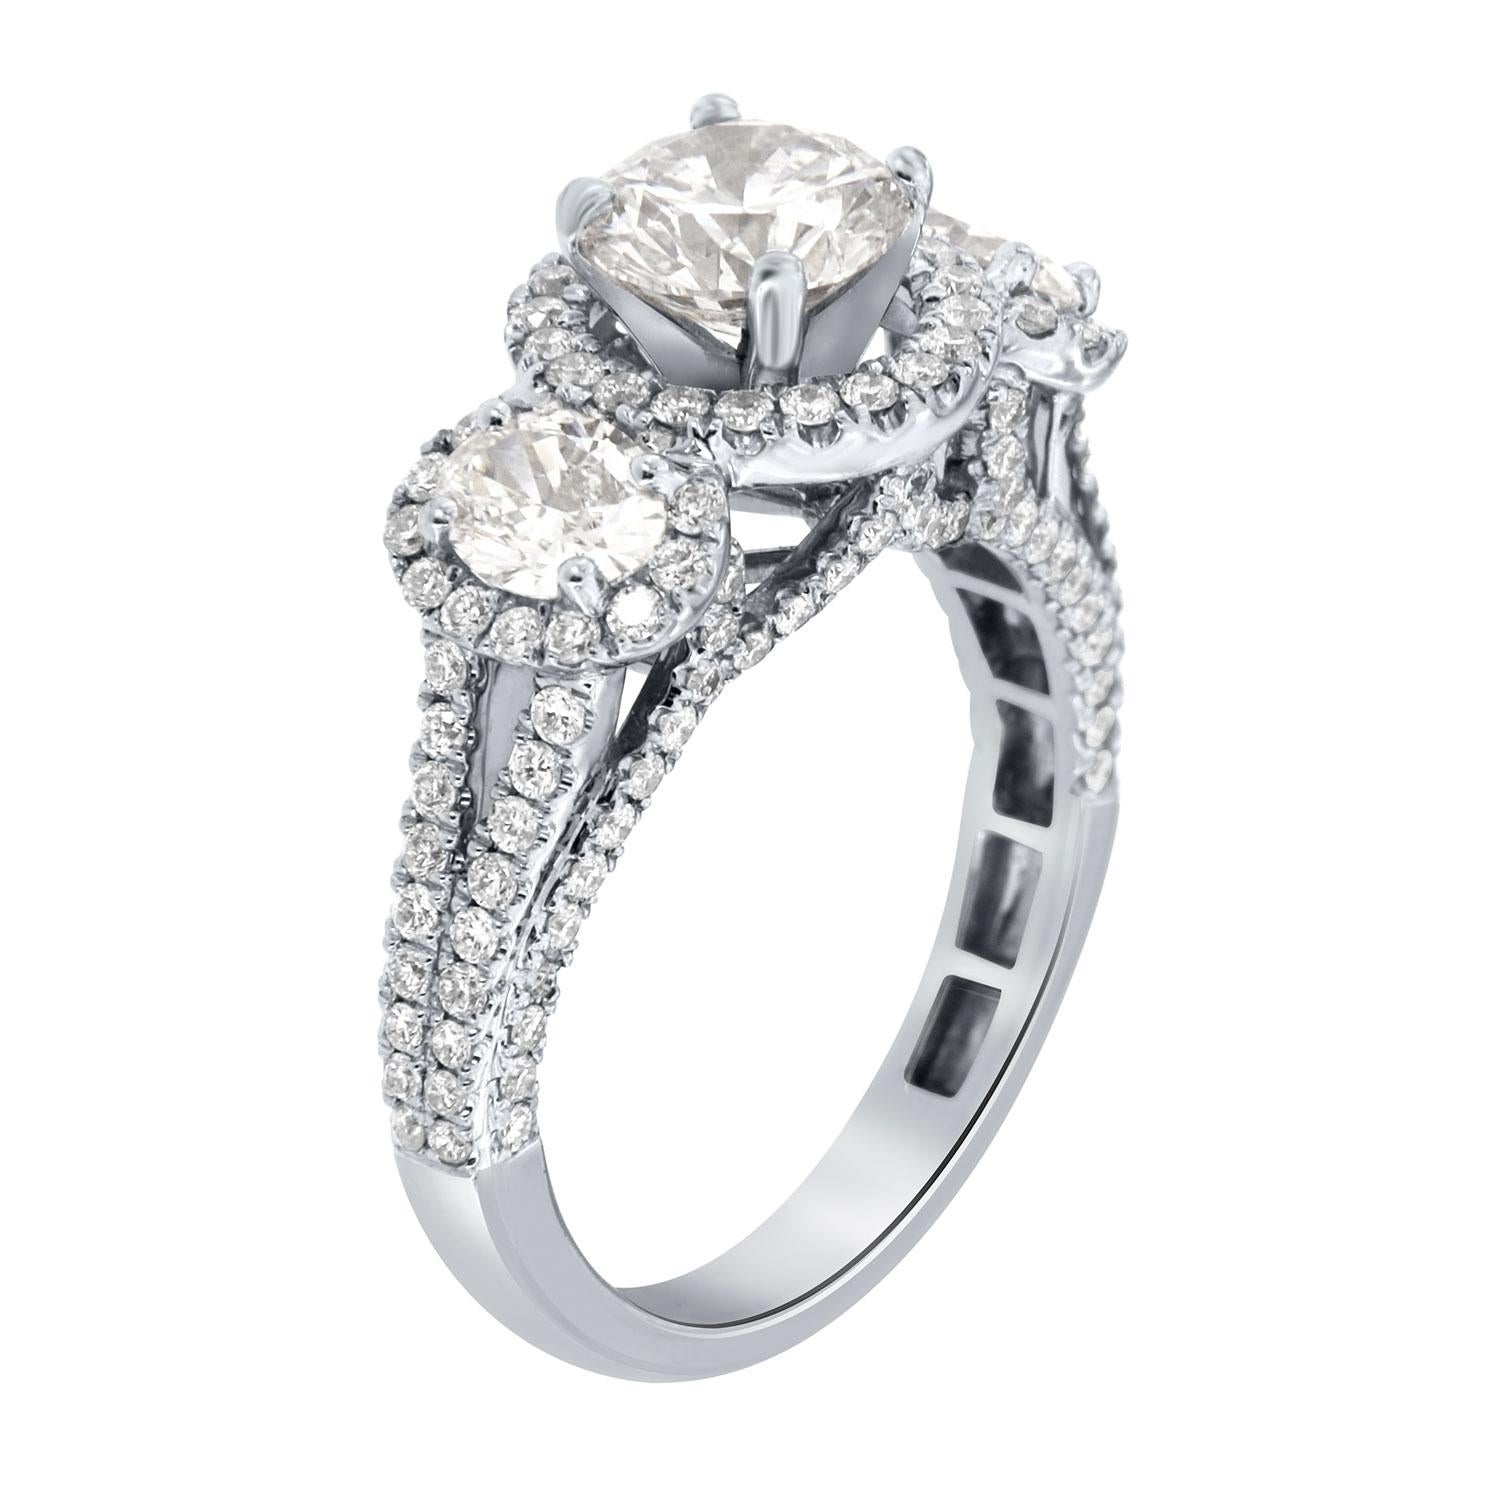 This Hand-Crafted stunning ring features 0.95- Carat F Color SI2 in Clarity encircled by a halo of delicate diamonds Micro-Prong set. It's flanked by two perfectly matched Oval-shaped diamonds surrounded by a soft halo of diamonds. Two thin rows of